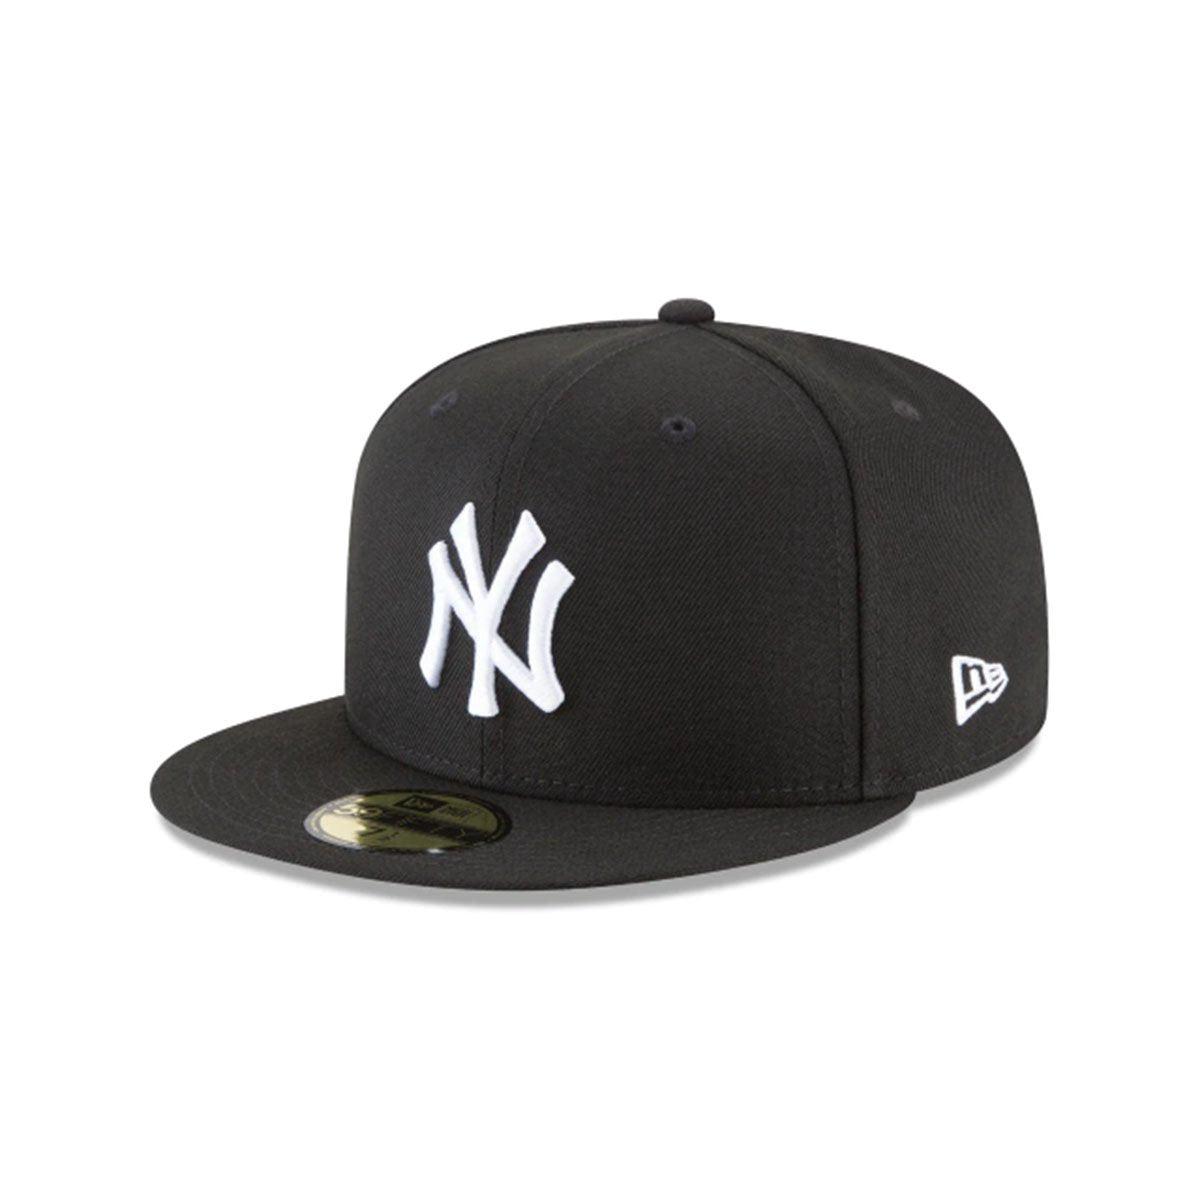 MLB New York Yankees NEO 39Thirty Stretch Fit Cap, Navy, Large/X-Large